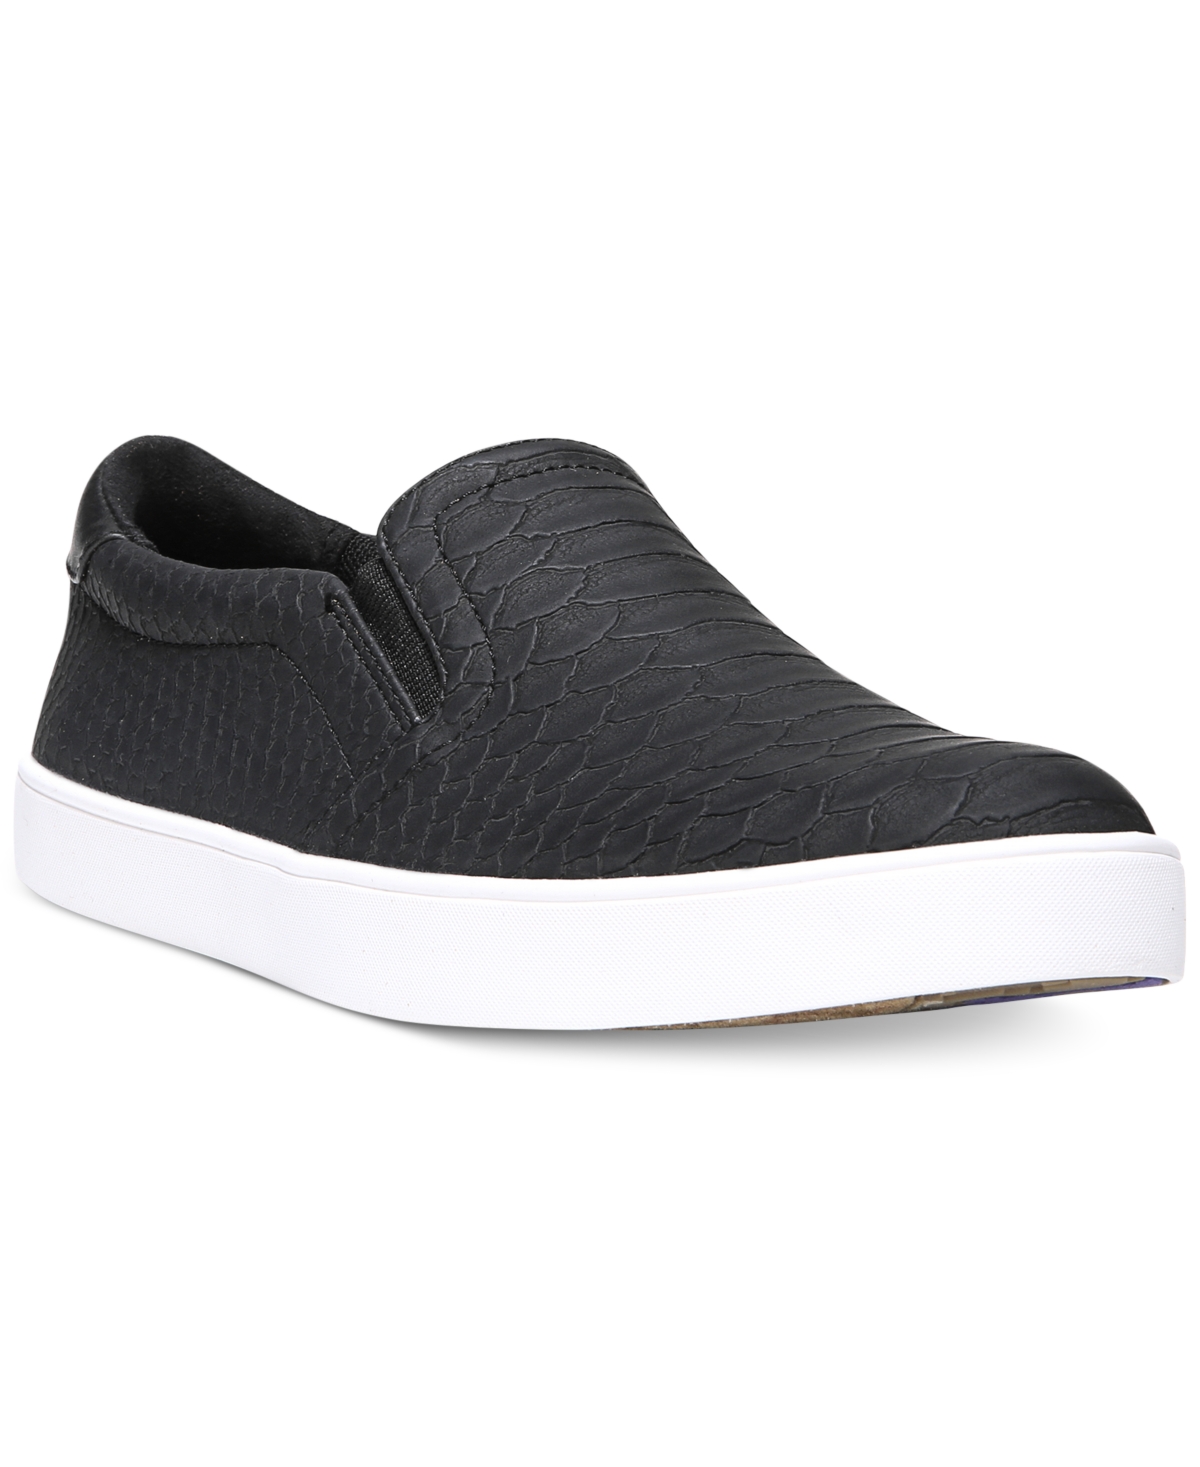 UPC 727679380232 product image for Dr. Scholl's Women's Madison Slip on Sneakers Women's Shoes | upcitemdb.com